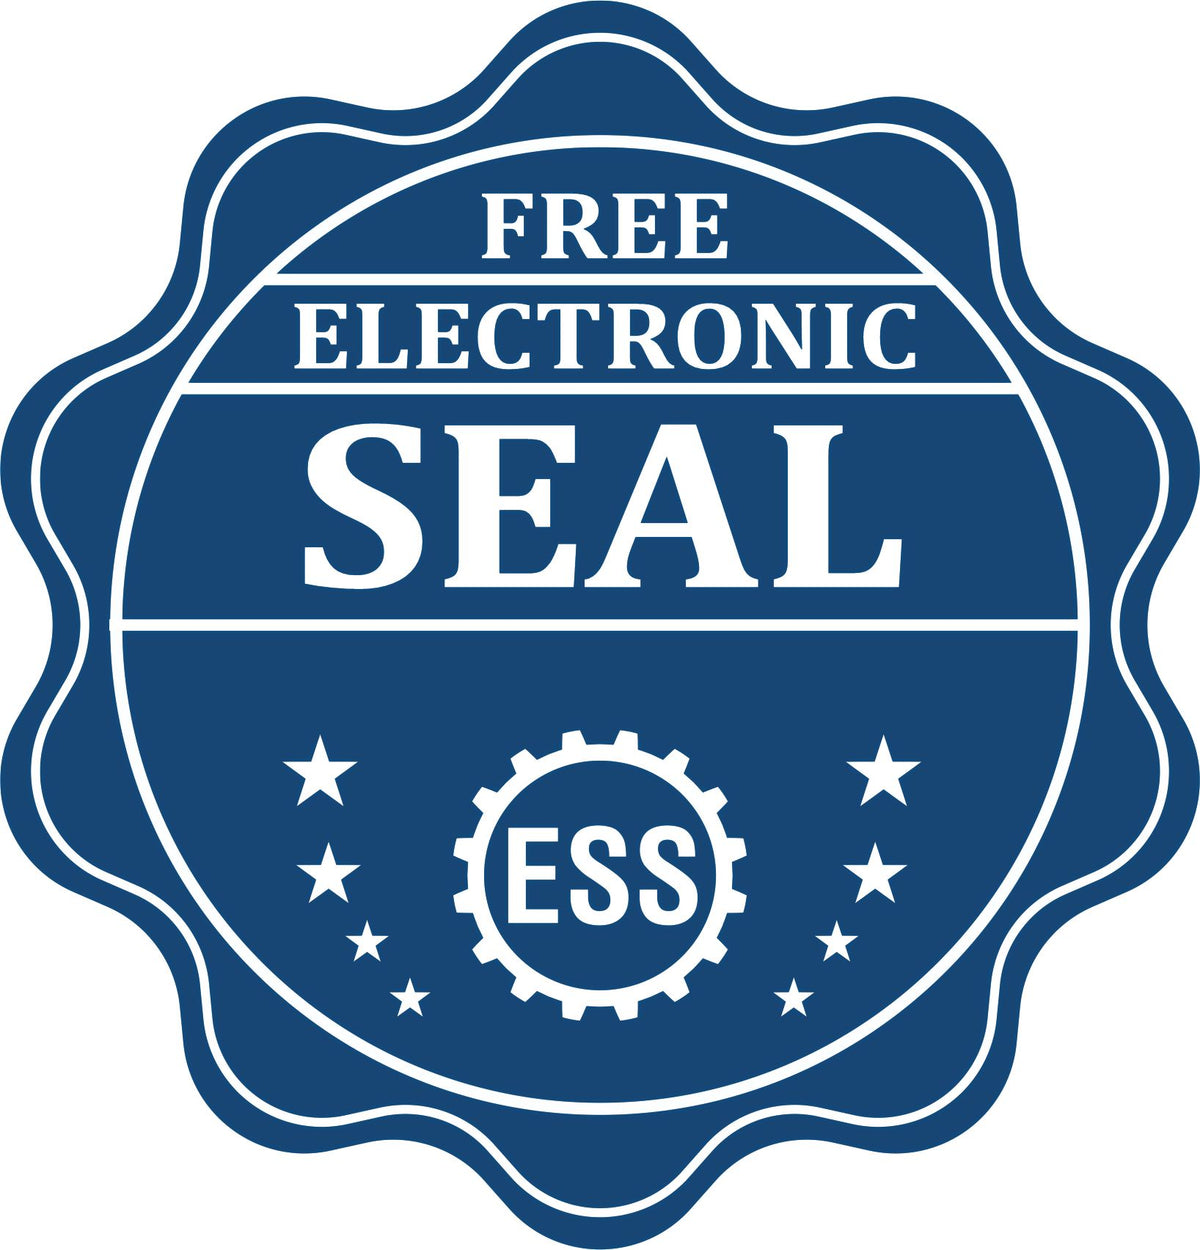 A badge showing a free electronic seal for the Handheld Delaware Professional Geologist Embosser with stars and the ESS gear on the emblem.